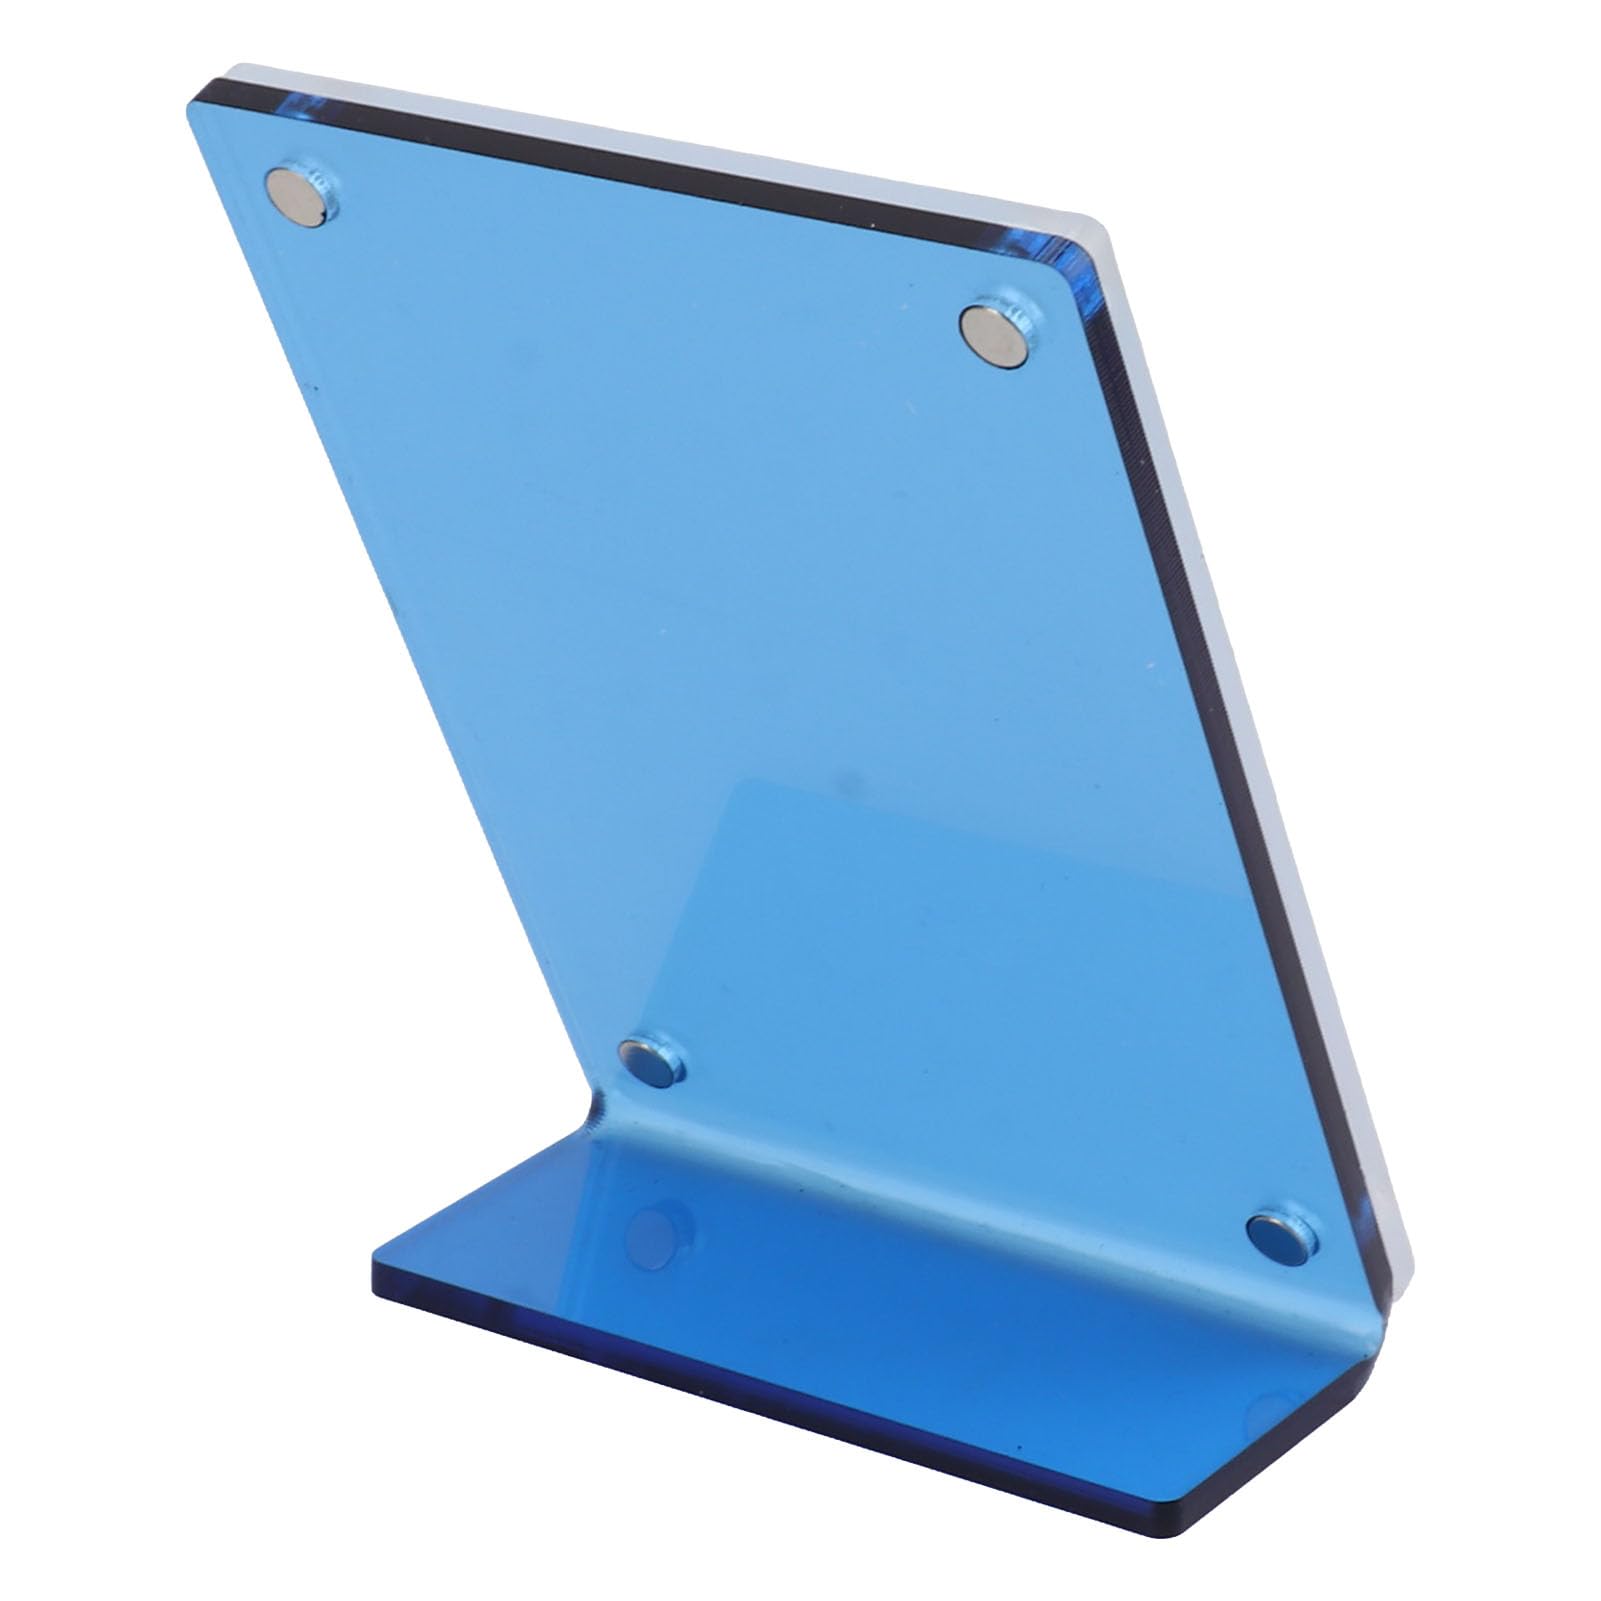 LJCM Slanted Back Photo Frame, Wide Application 3 Inch Multi Purpose Acrylic Self Standing Photo Frame L Shaped for Business Cards for Office (Blue)